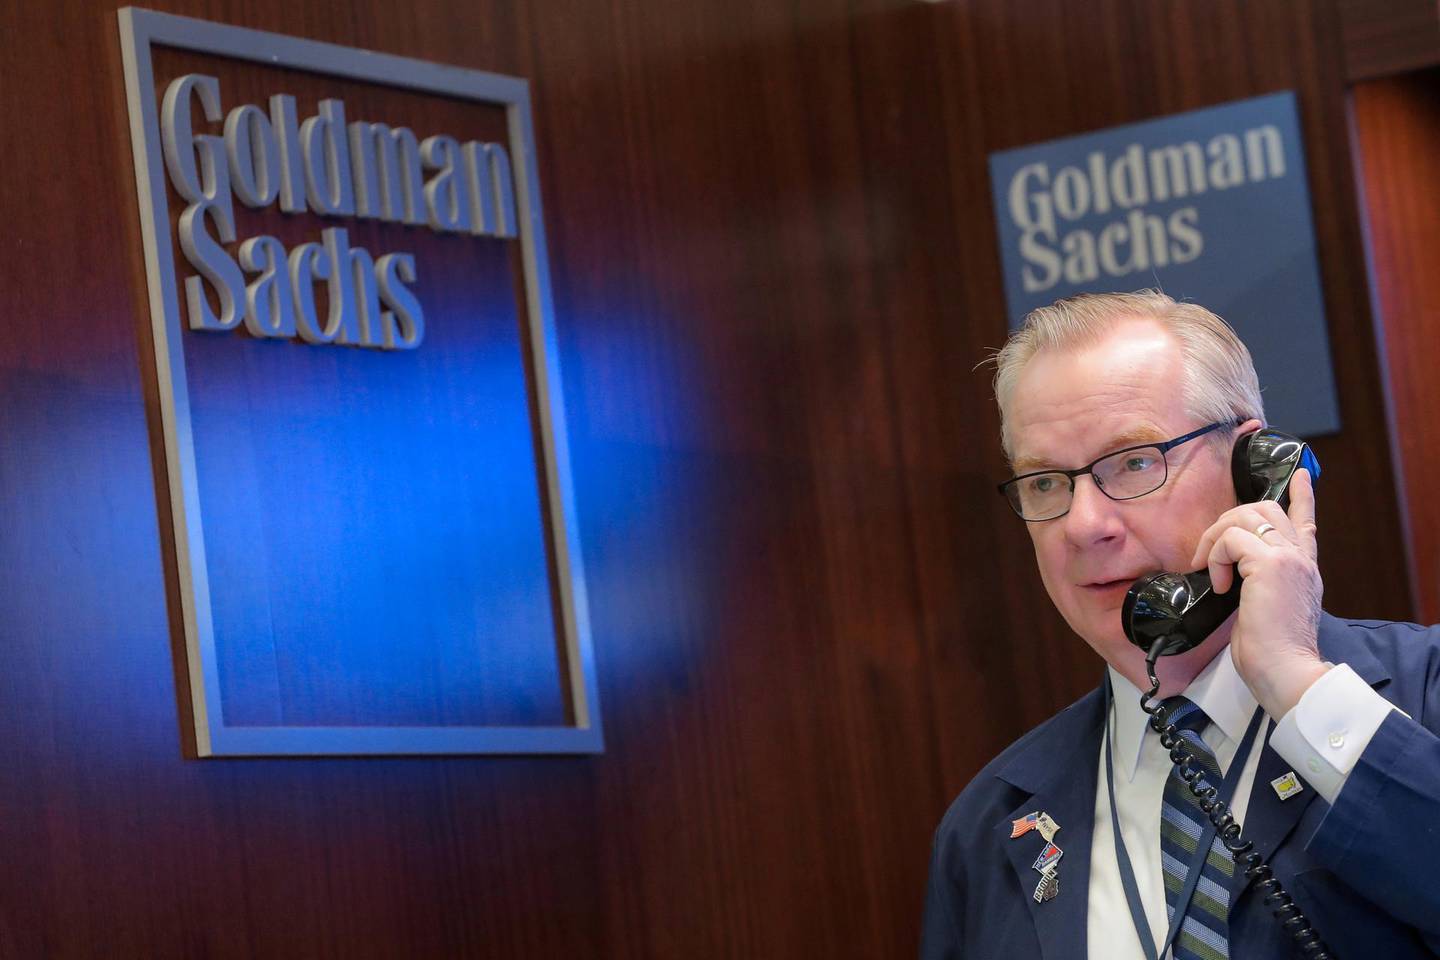 FILE PHOTO: A trader works inside the Goldman Sachs booth on the floor of the New York Stock Exchange (NYSE) in New York, U.S., March 7, 2019. REUTERS/Brendan McDermid/File Photo